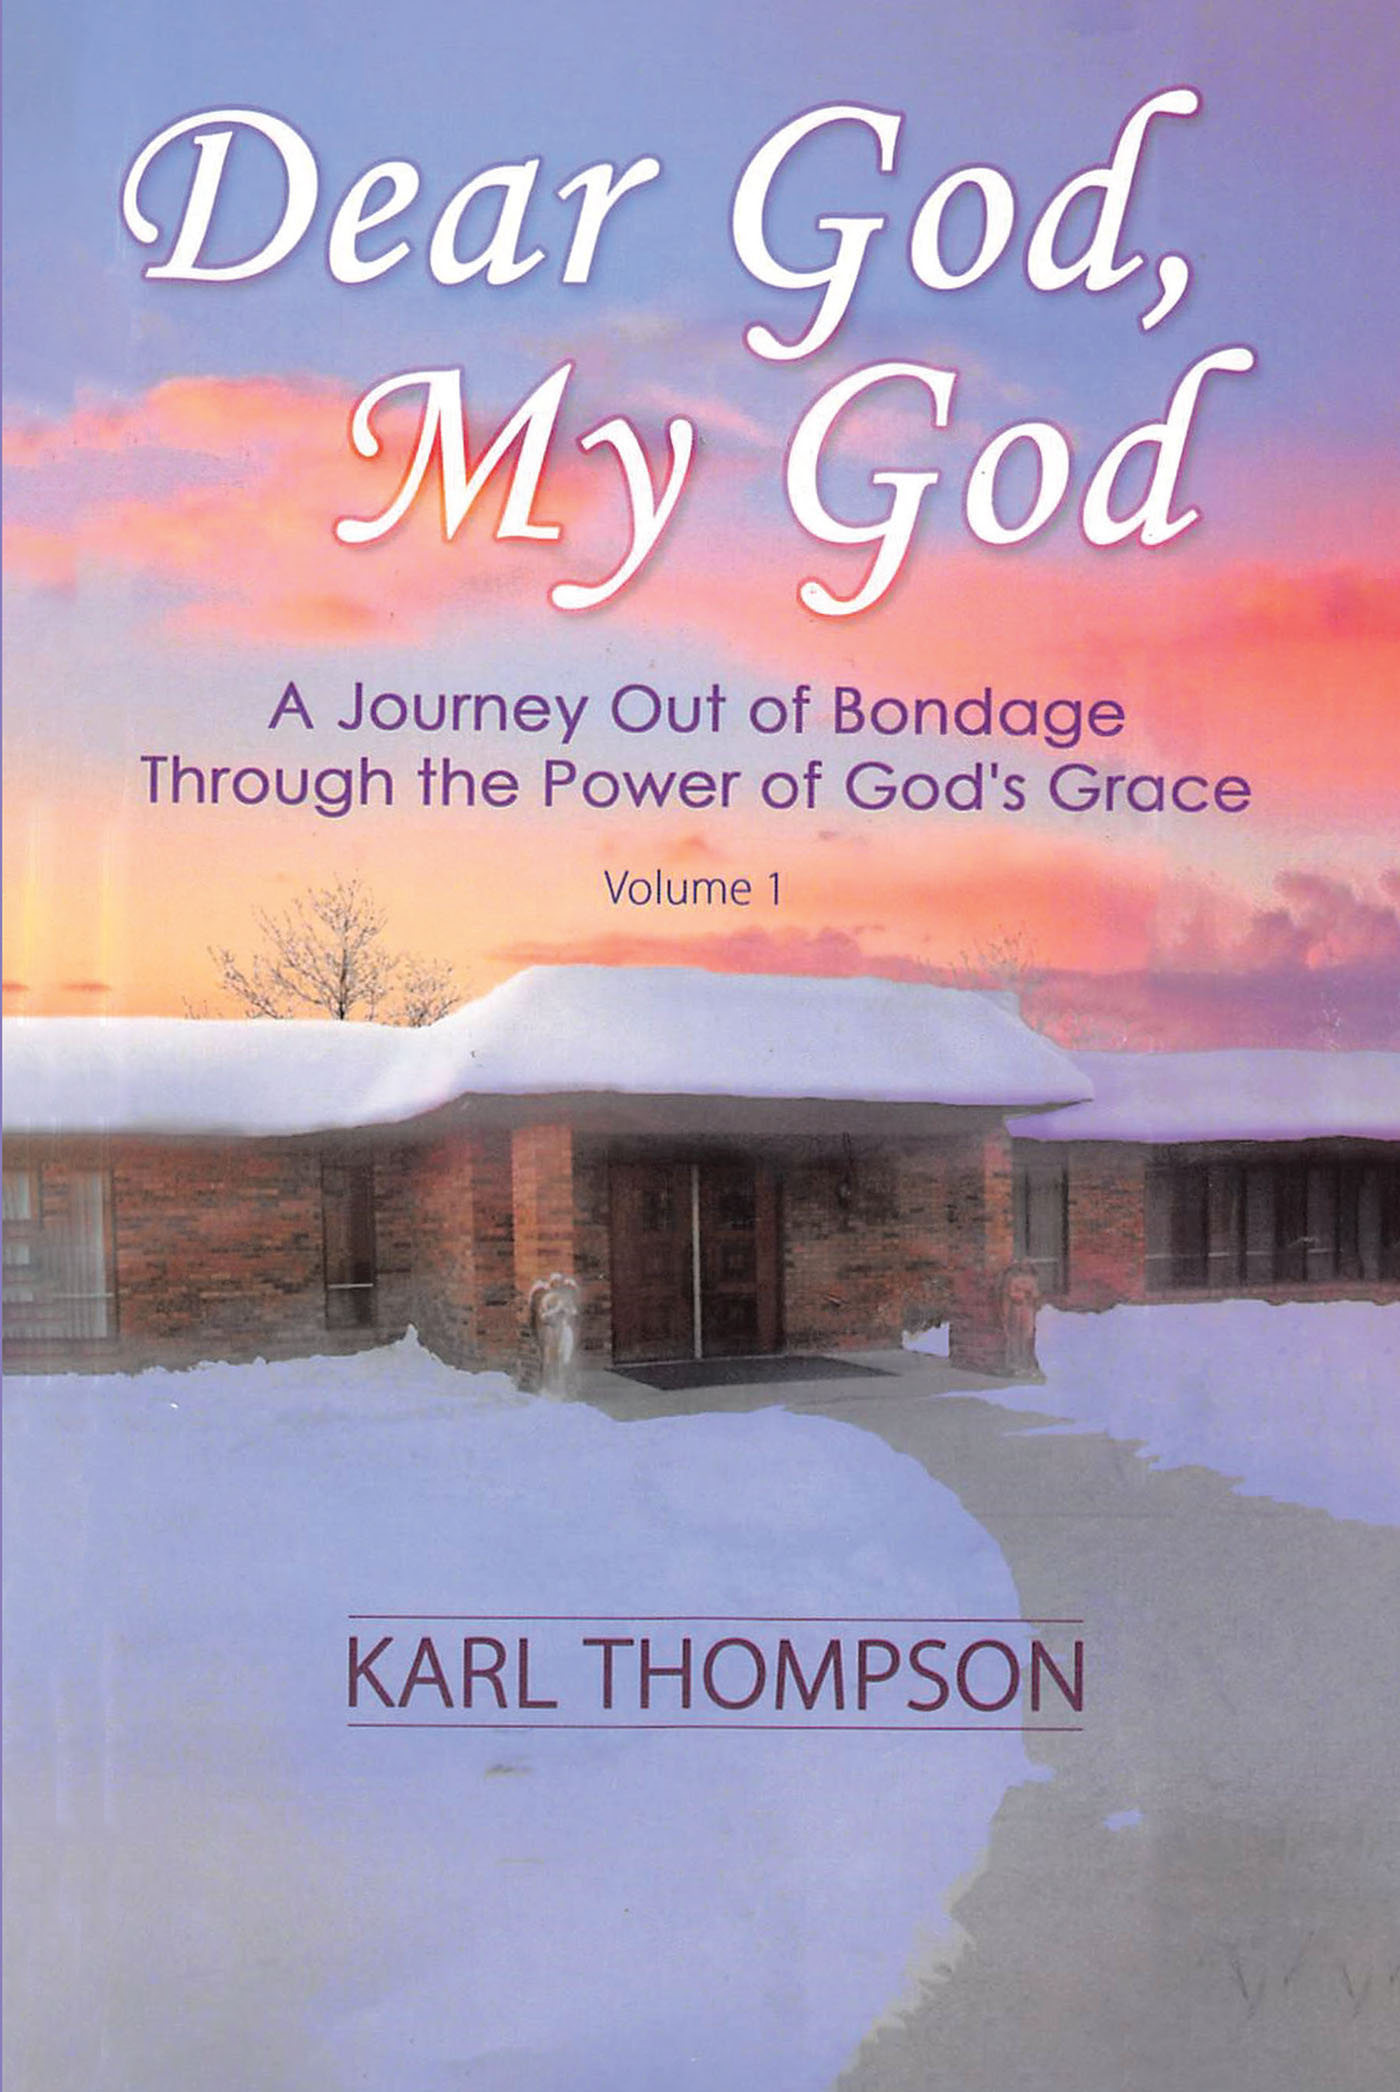 Author Karl Thompson S Newly Released Dear God My God Is The Journey Of One Man From Drug Addiction And Homelessness To Hope And Empowerment Through God